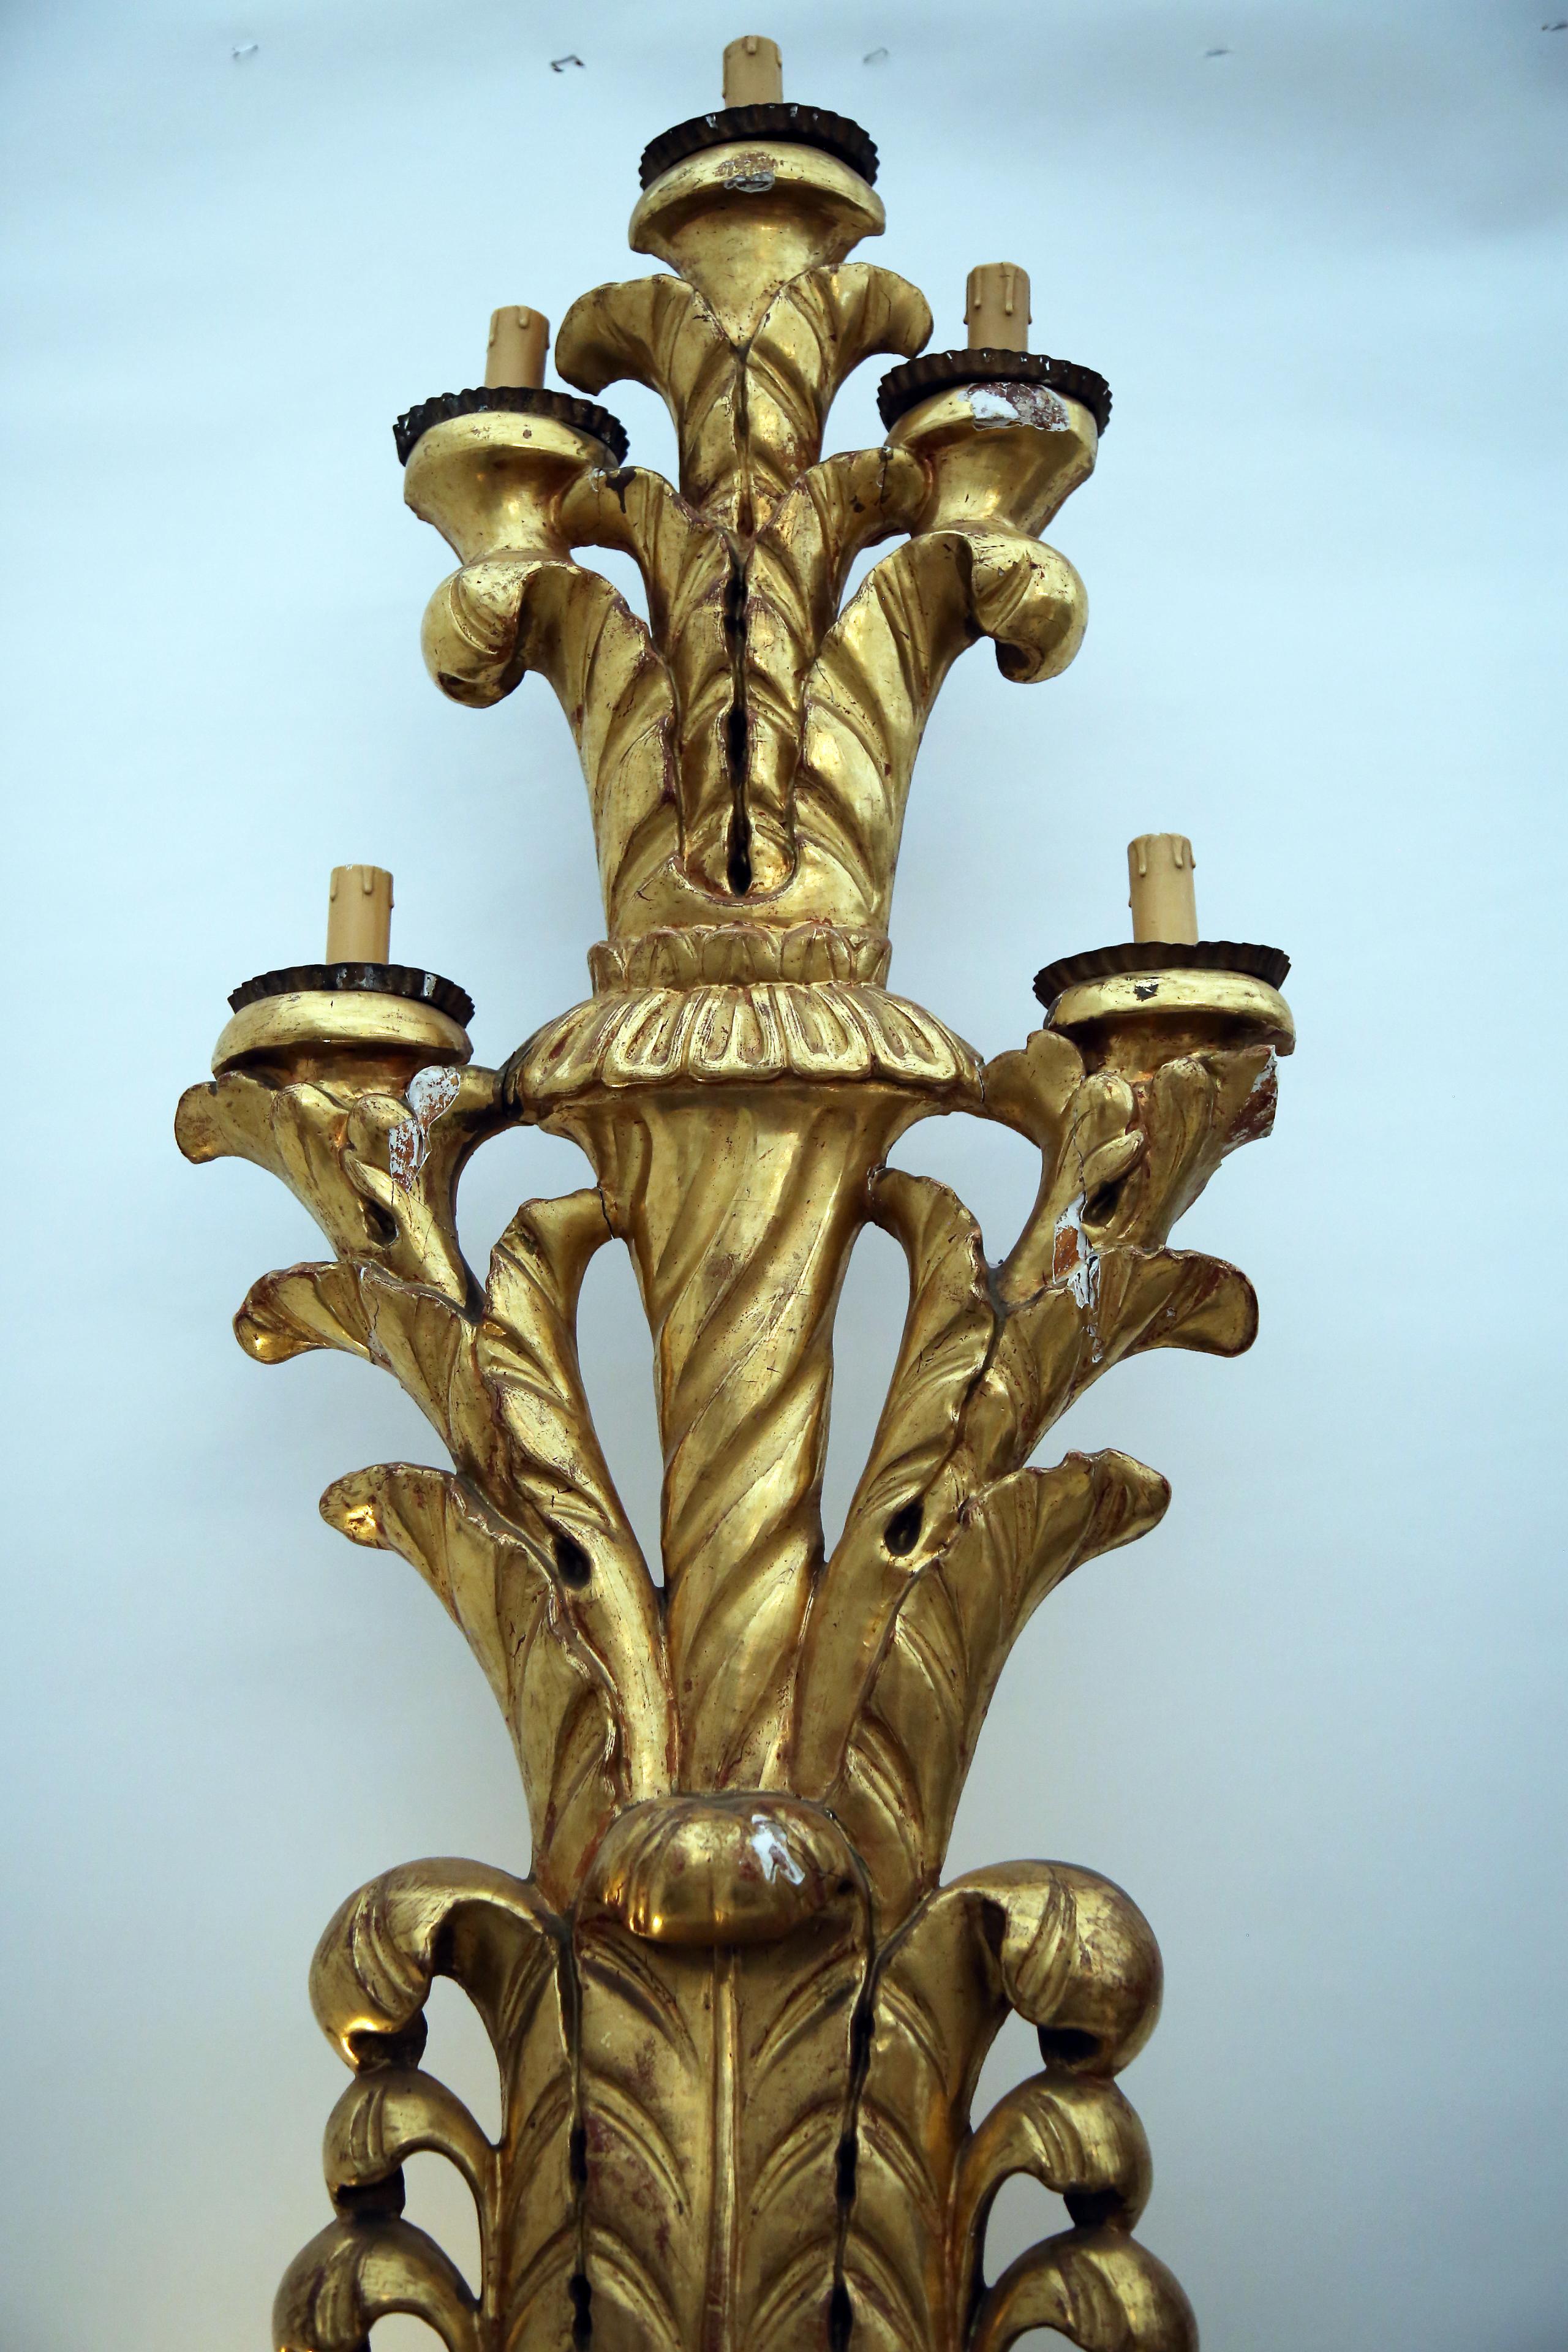 Here is a stunning 18th century Italian gold gilt candelabra. This fragment and light fixture is stunning. It needs to be rewired for the US standards or wires can easily be cut to make into a fragment and piece of art without lighting. Truly one of